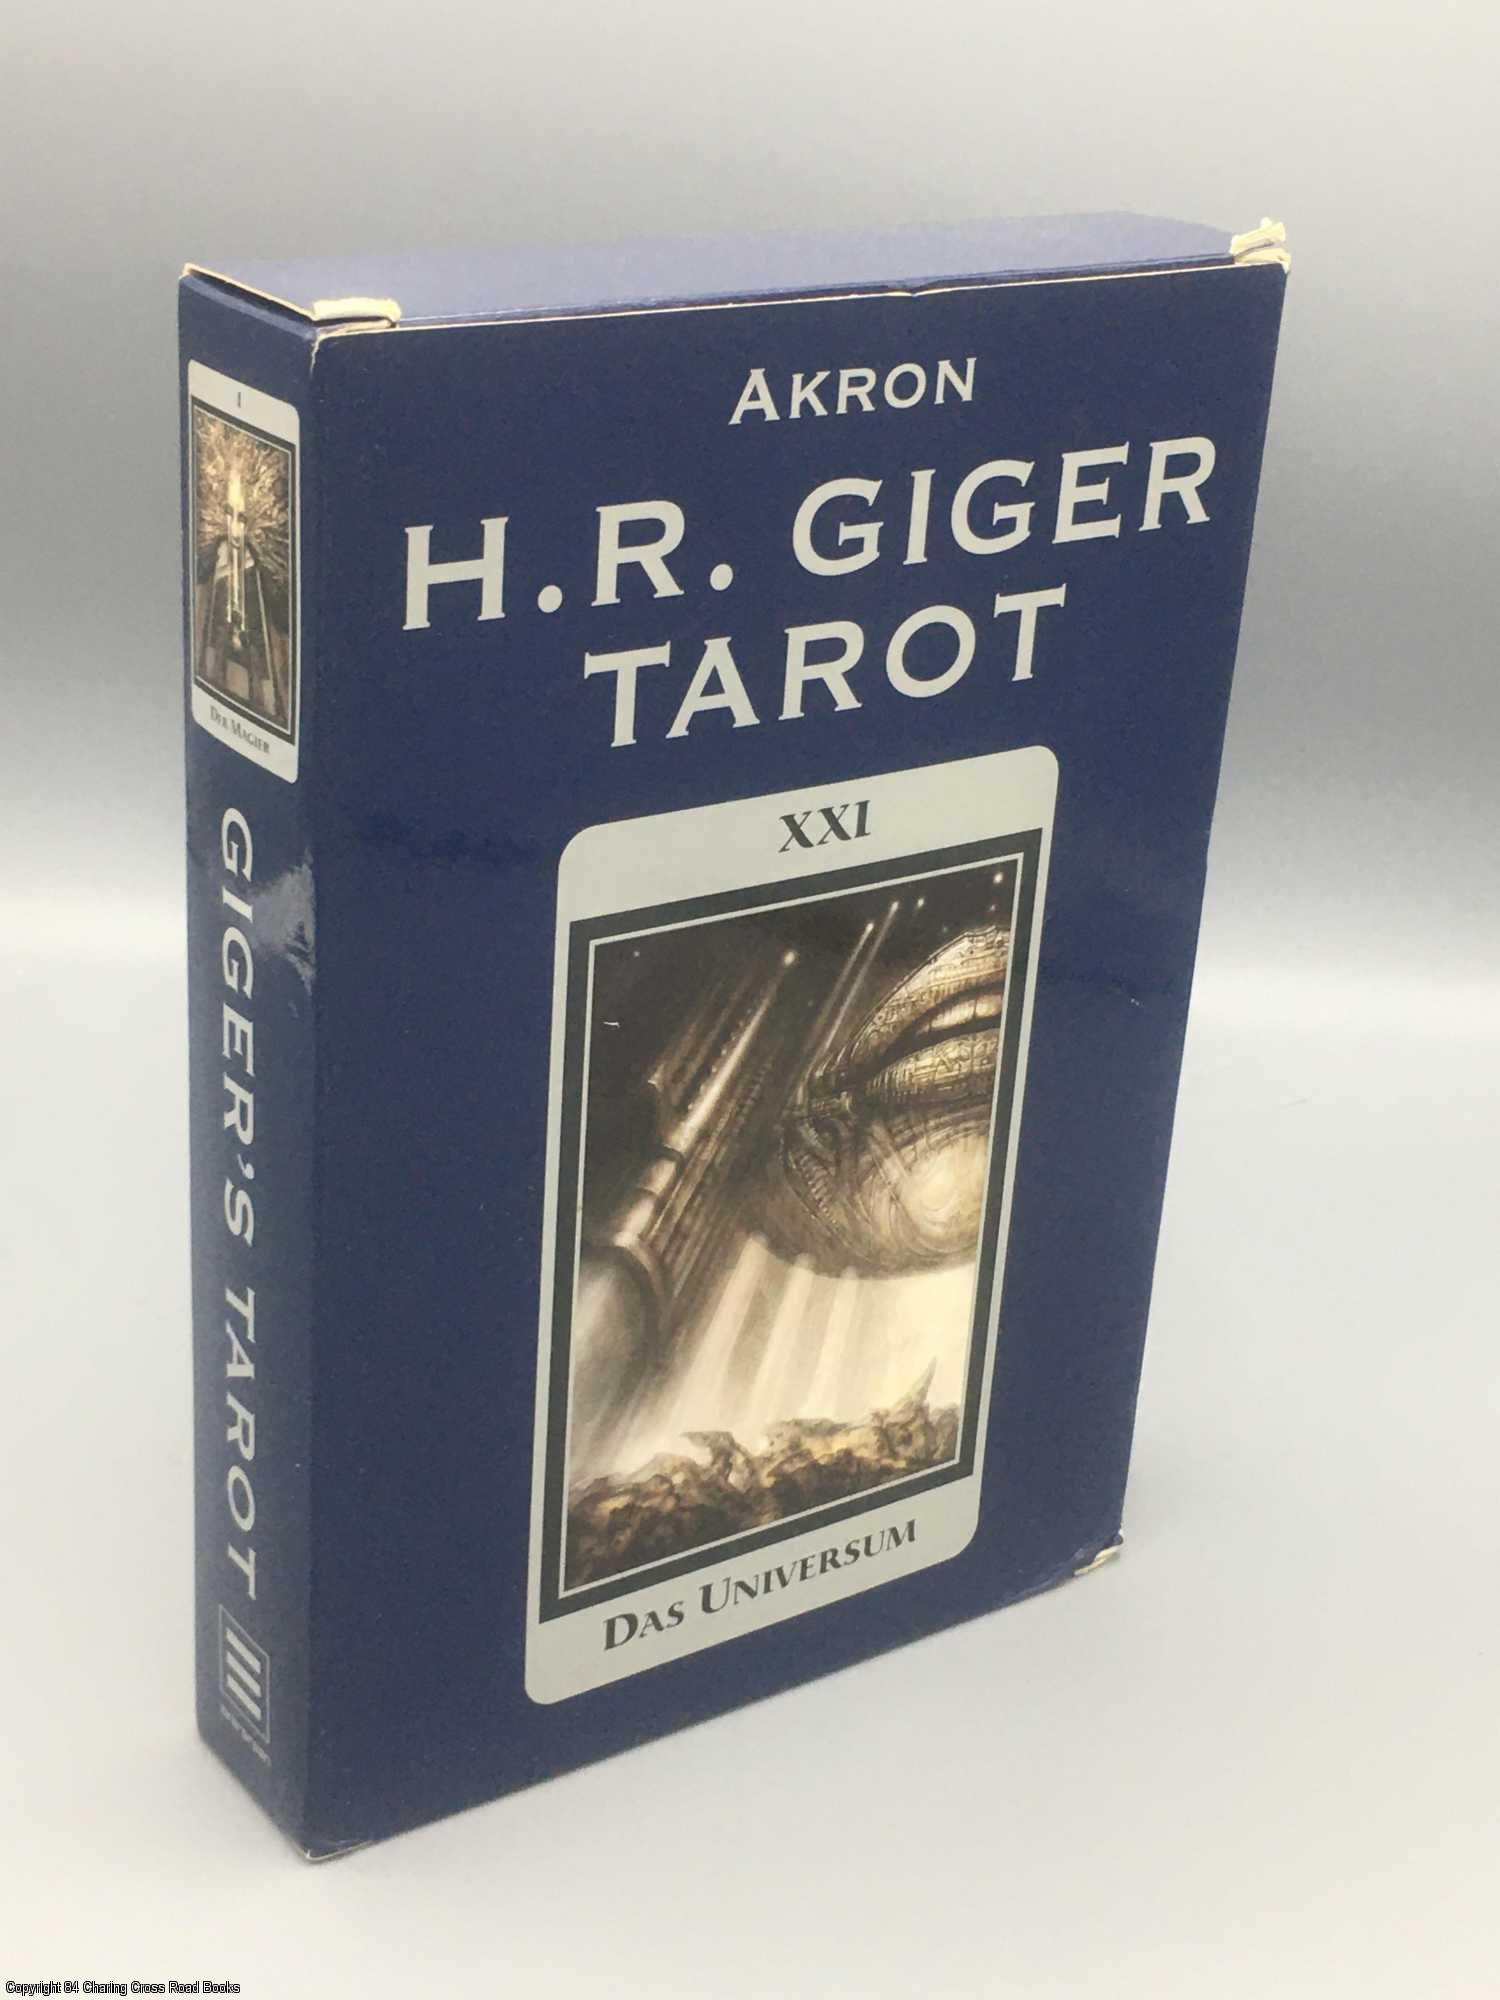 H.R. Giger Tarot Set with Cards by H. R. Giger on 84 Charing Cross Rare  Books